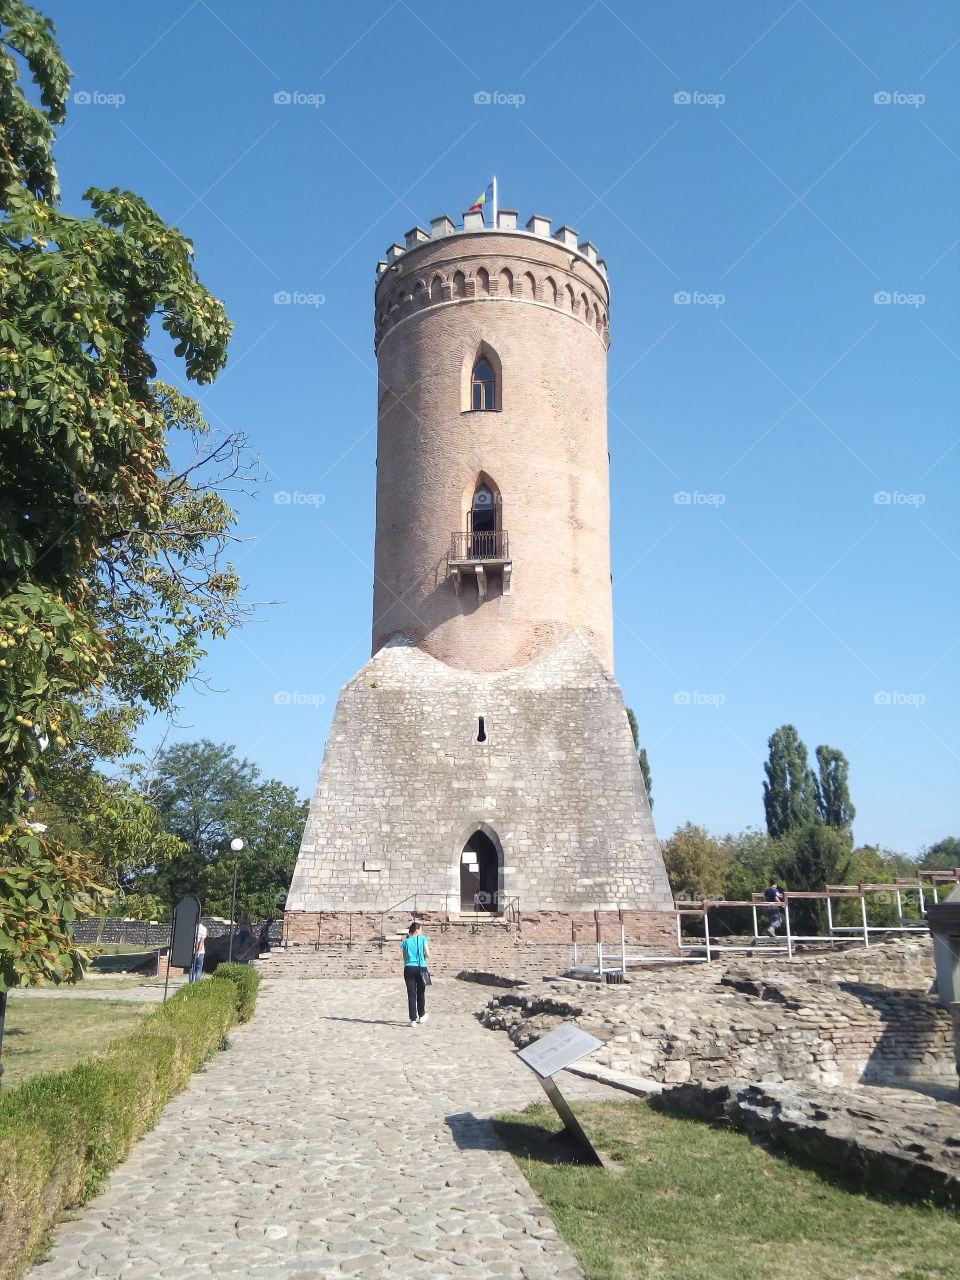 Chindiei tower